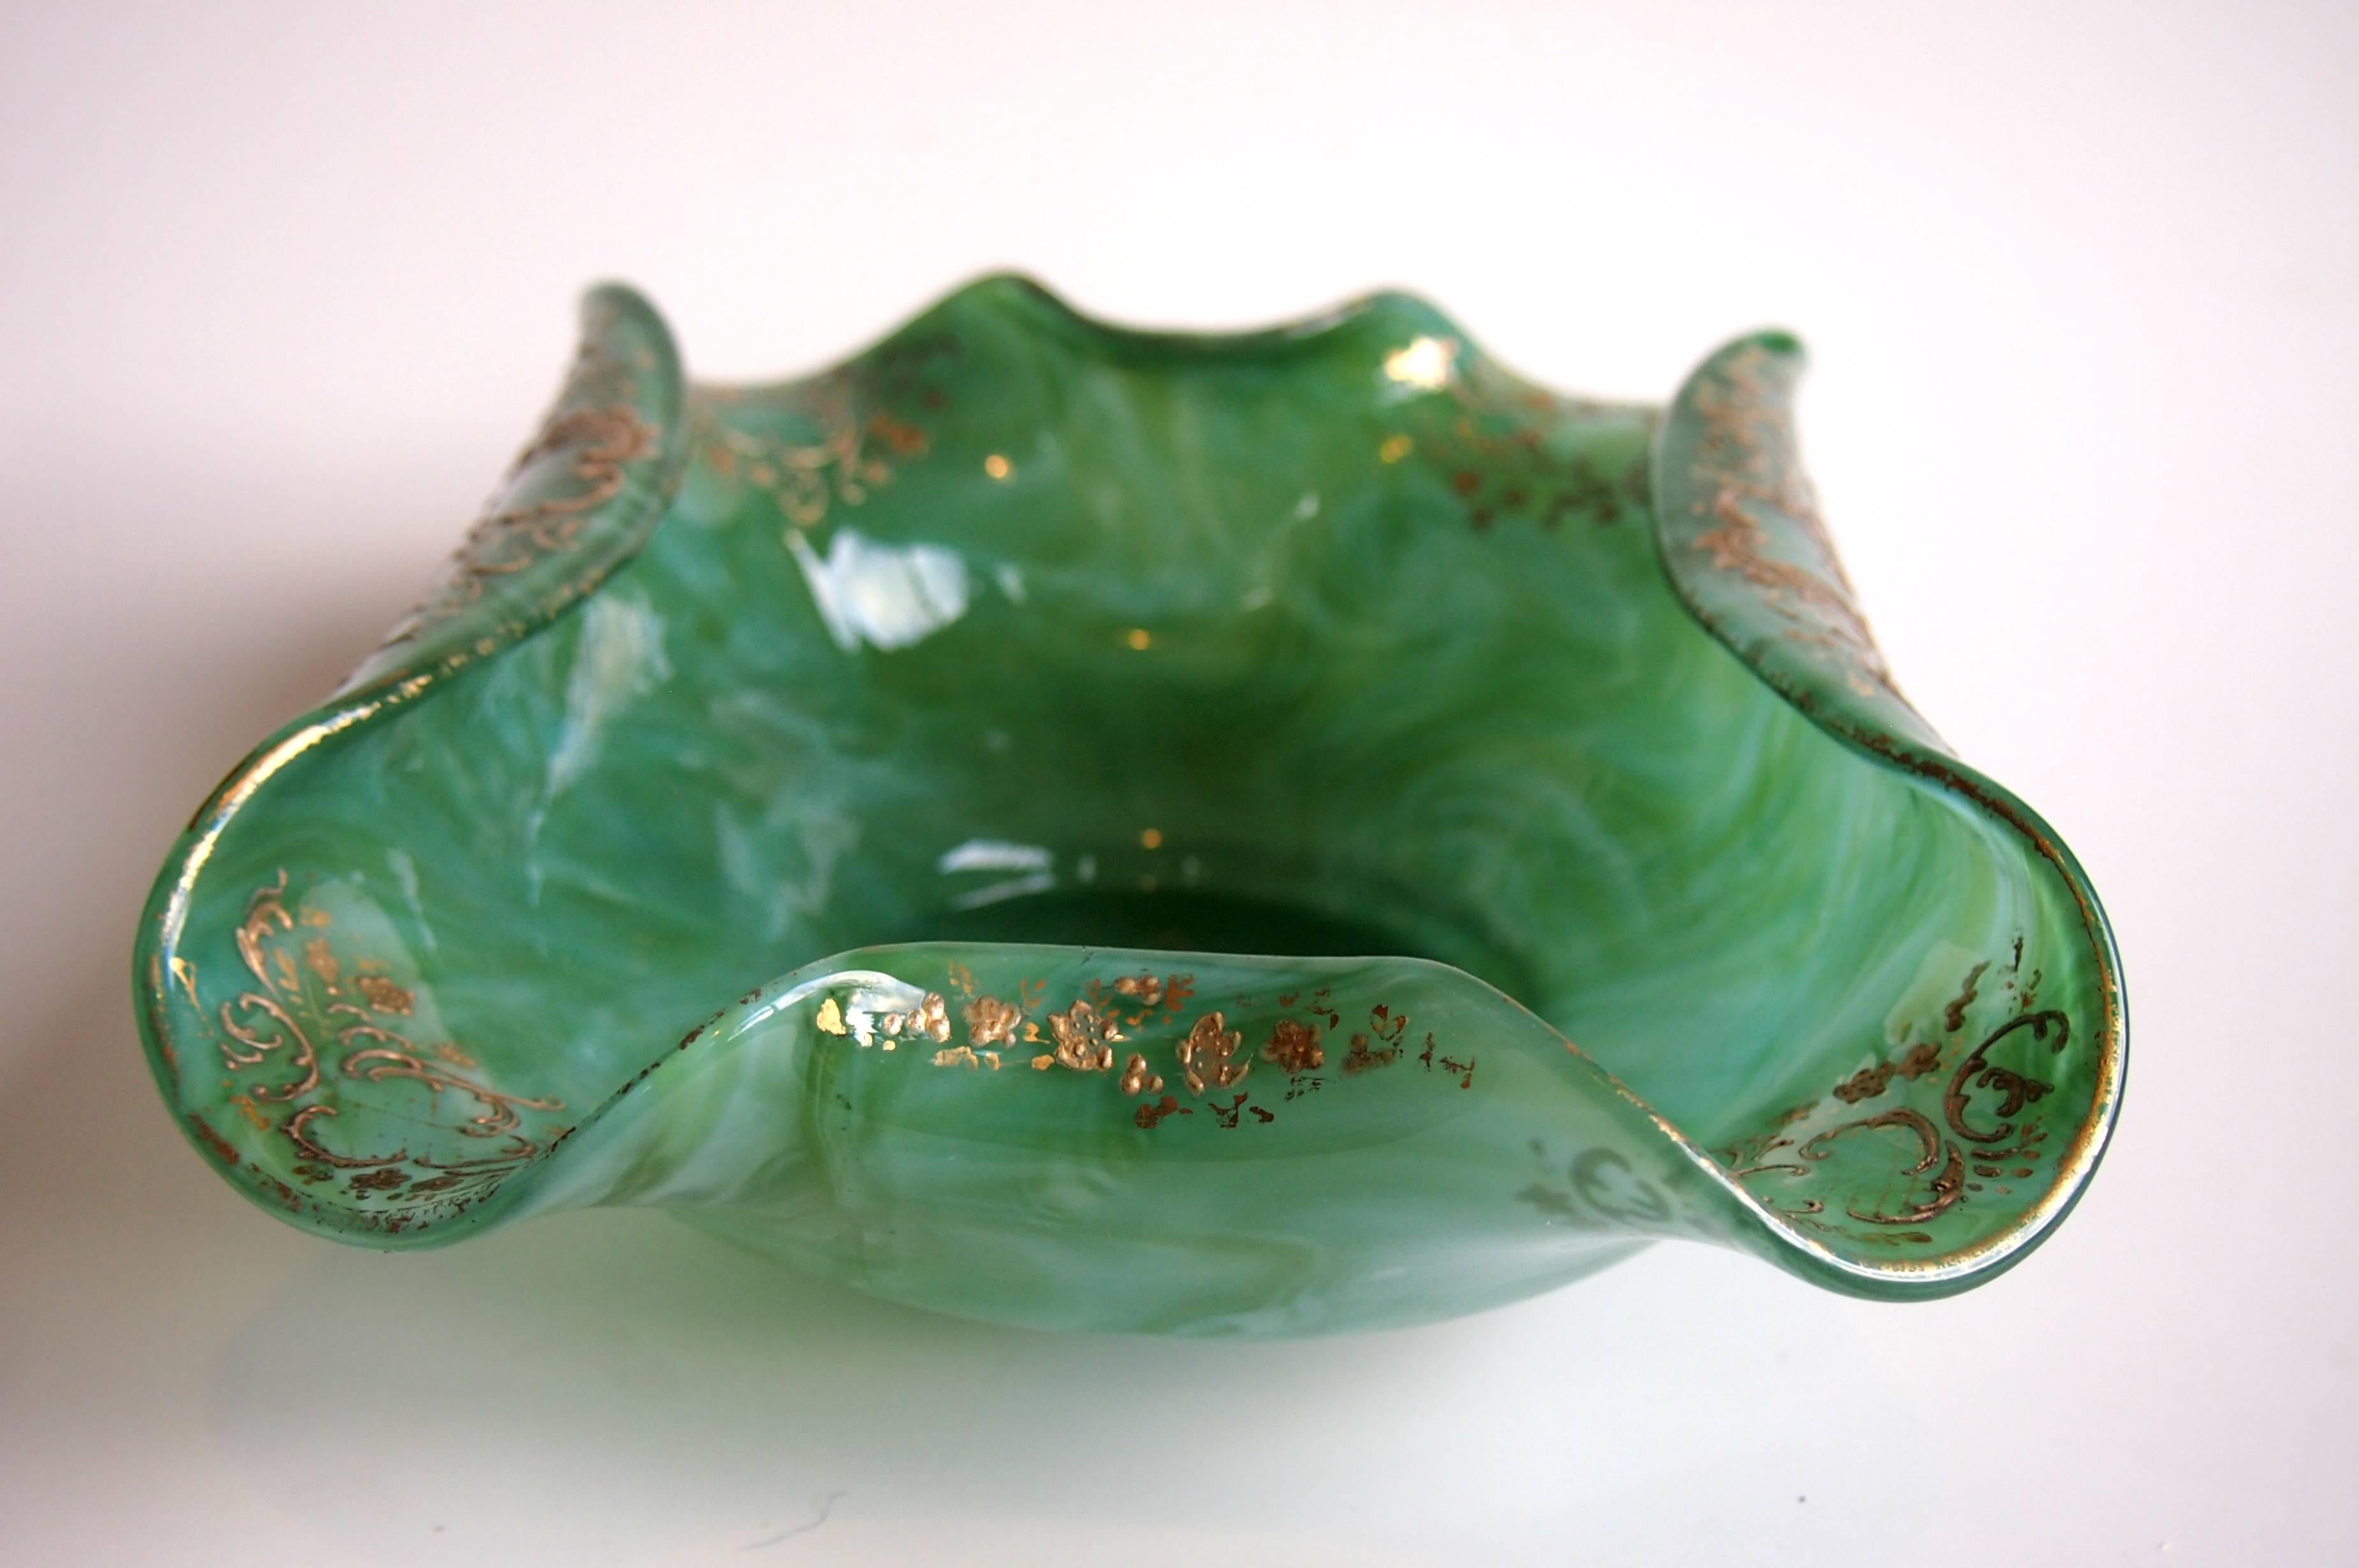 Super Loetz gilded and turned in open bowl in the Malachit finish. One of the marbled series of patterns Malachit is designed to look like Malachite stone with streaks of light and dark green. It's decorated in raised gold with one of Loetz's most